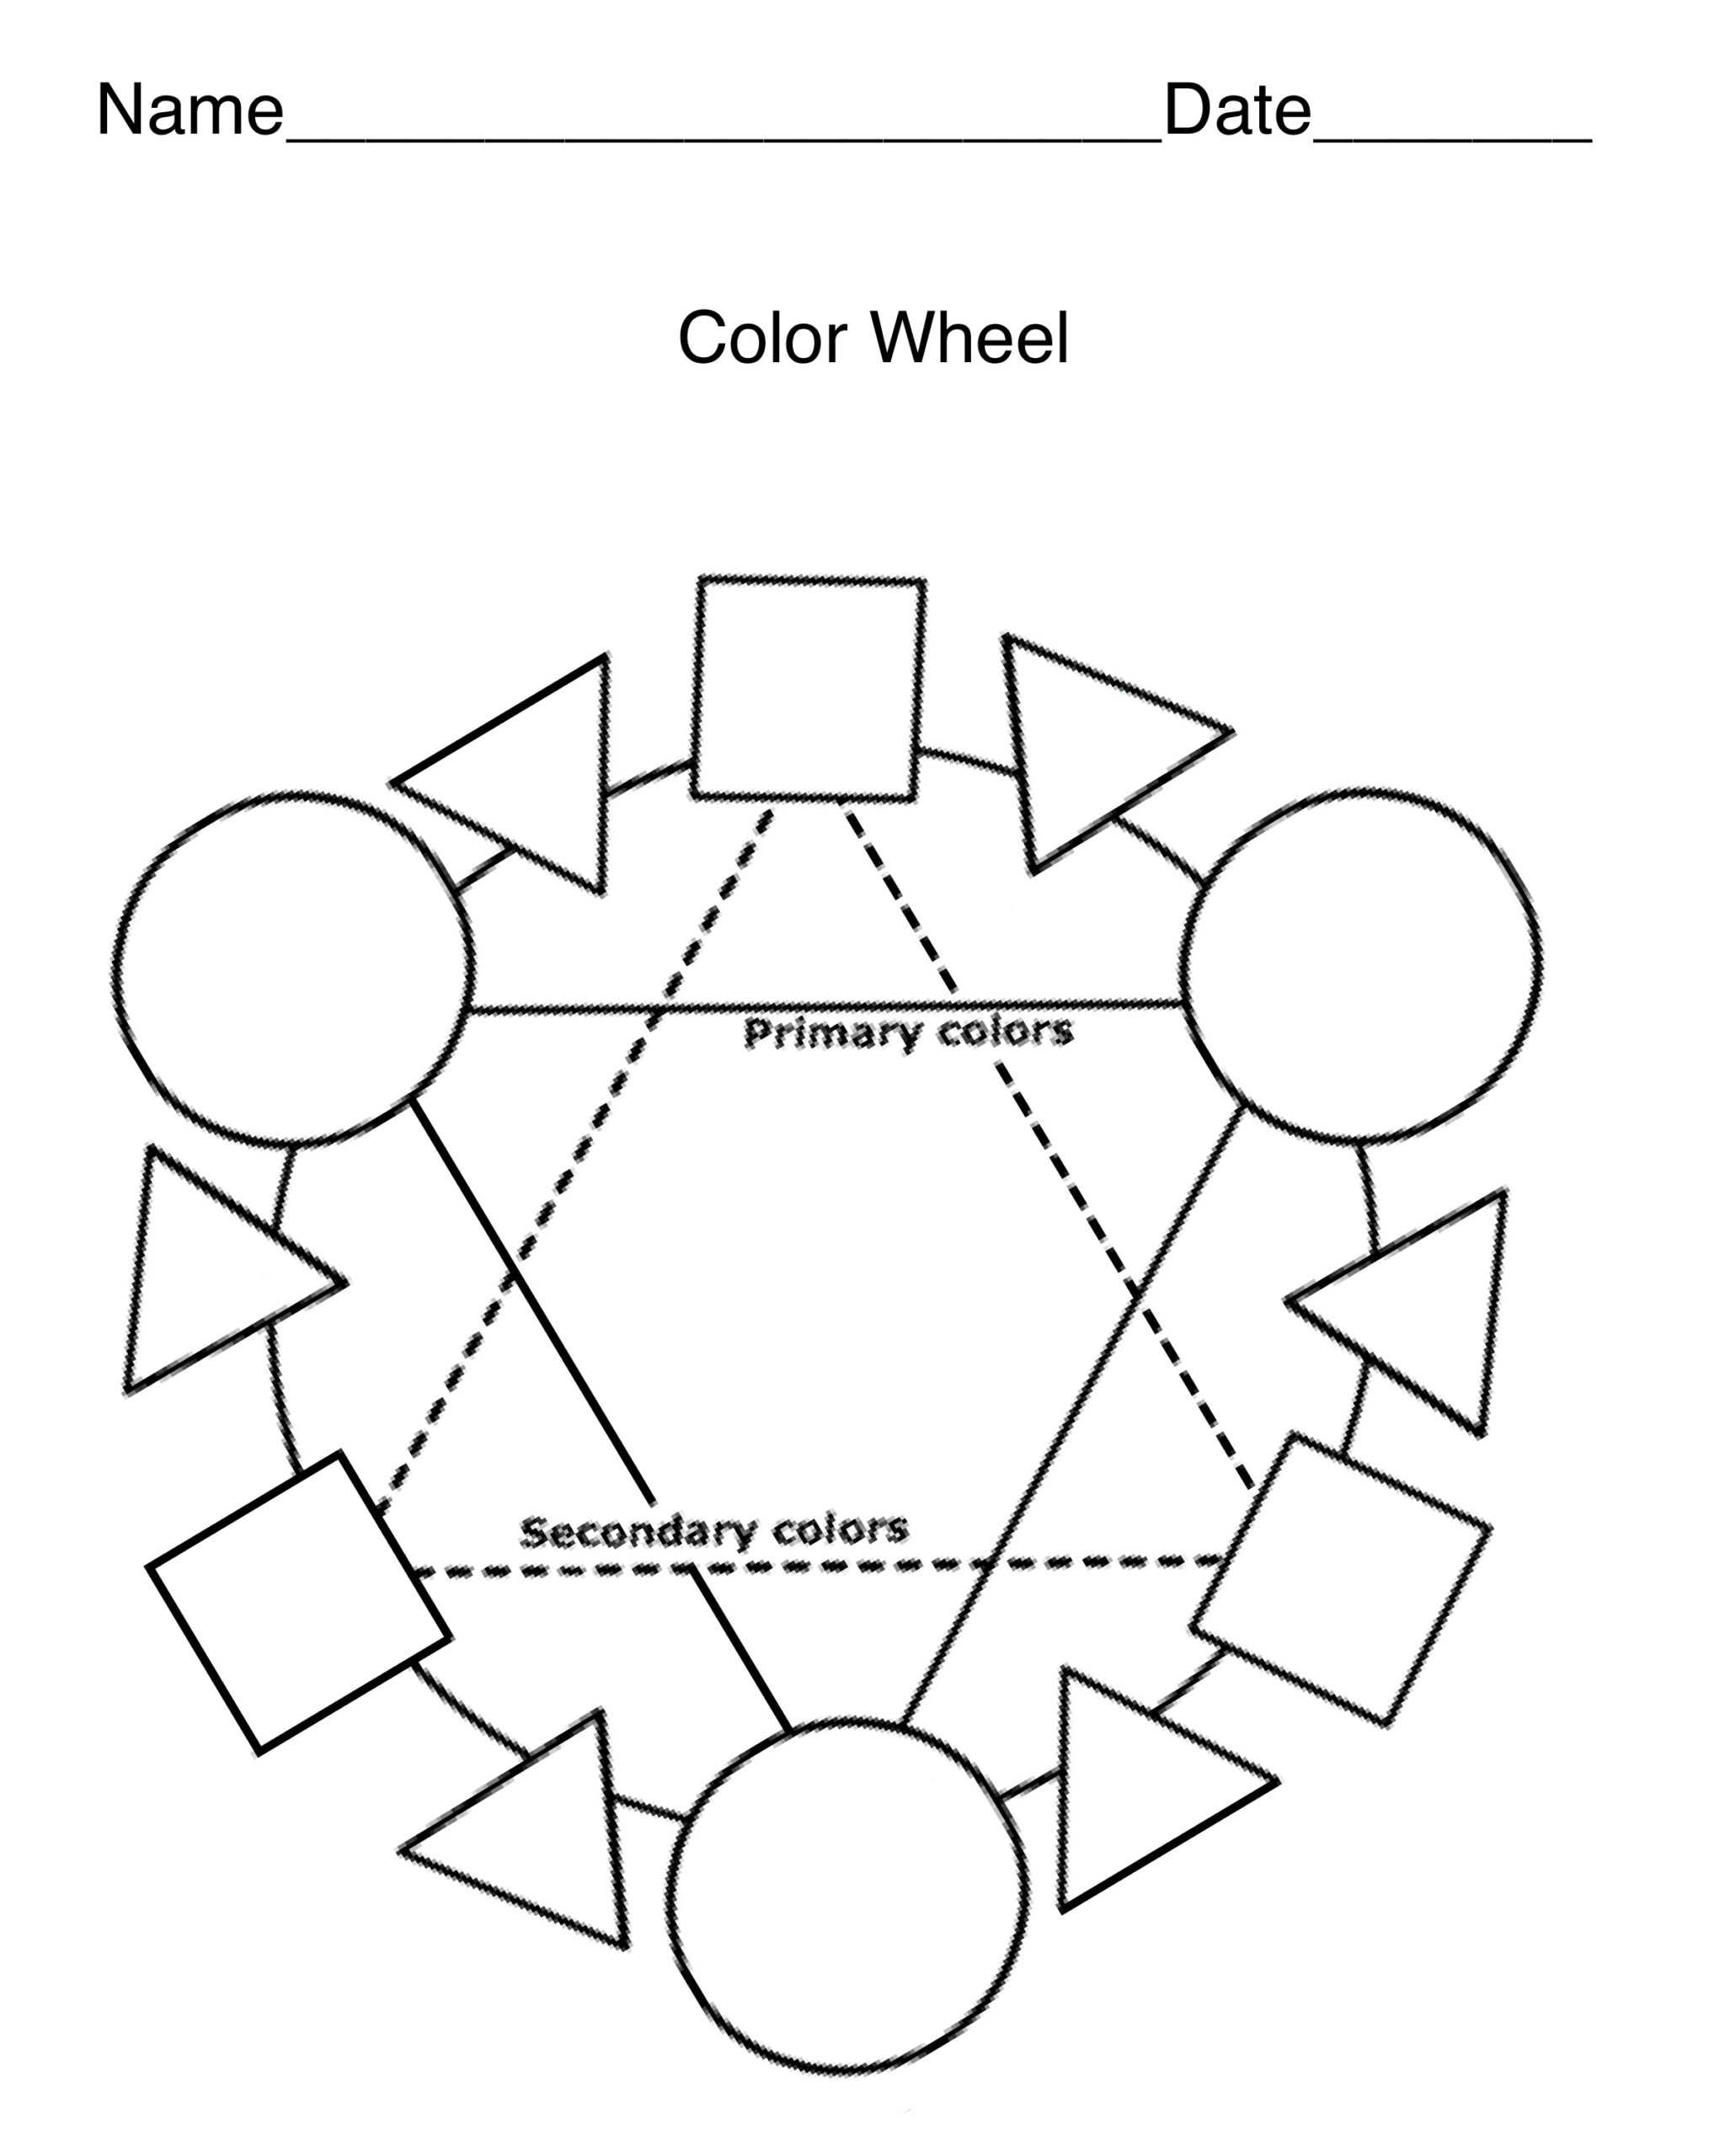 Blank Color Wheel Template. Tertiary Colors Blank Color Intended For Blank Color Wheel Template